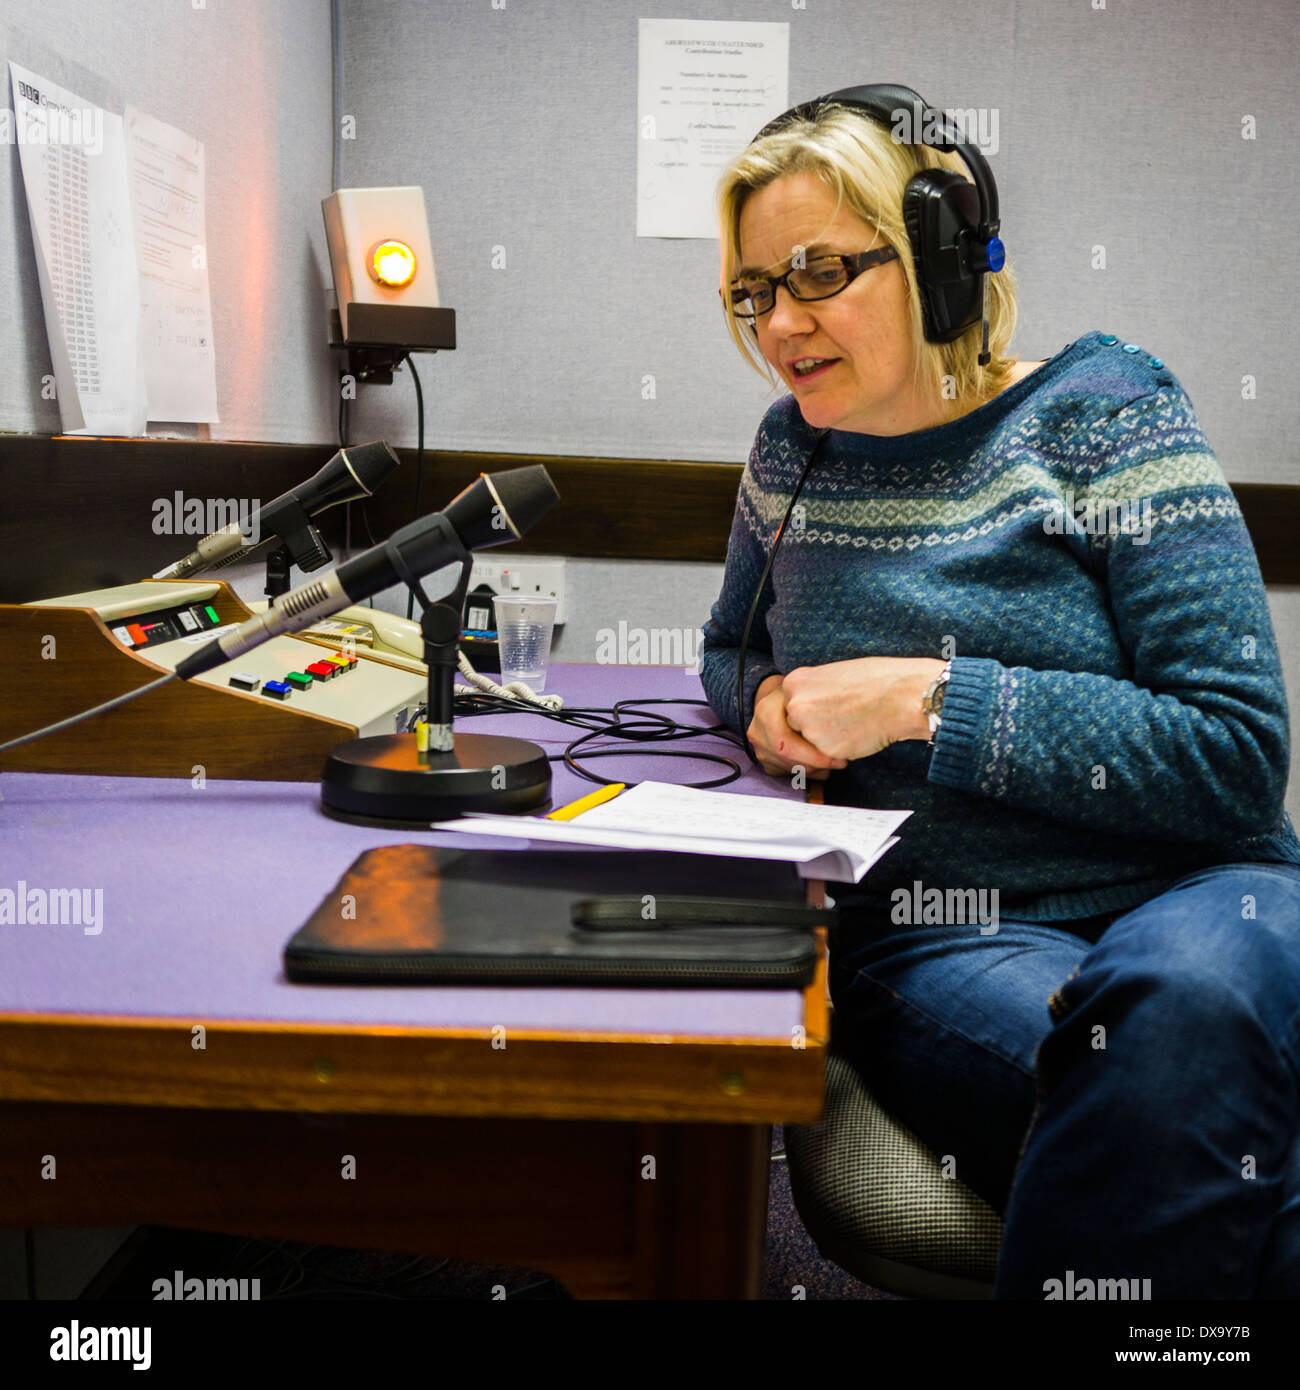 A woman - Elin Haf Gruffydd Jones - contributing to a live welsh BBC Wales radio broadcast from a small regional studio, UK Stock Photo